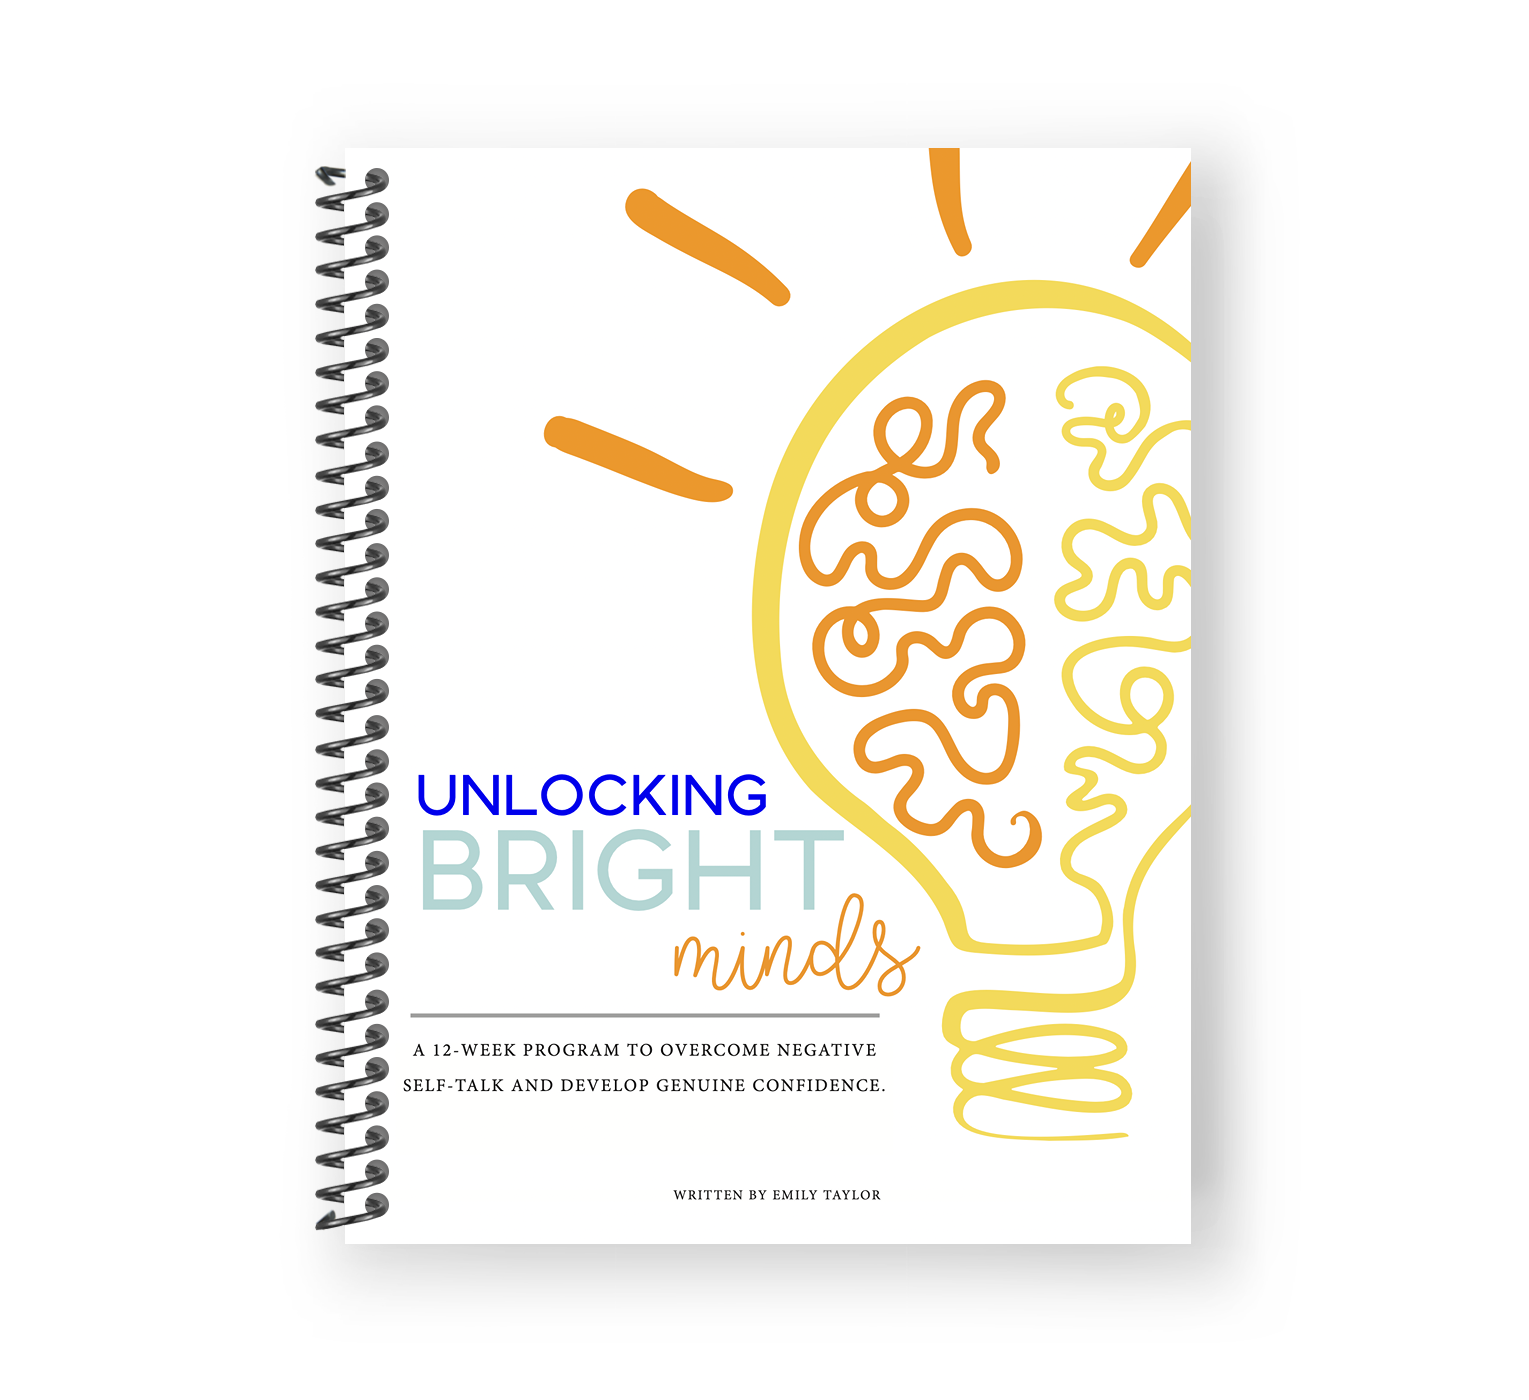 Unlocking Bright Minds: A 12-week program to overcome negative self-talk and develop genuine confidence.